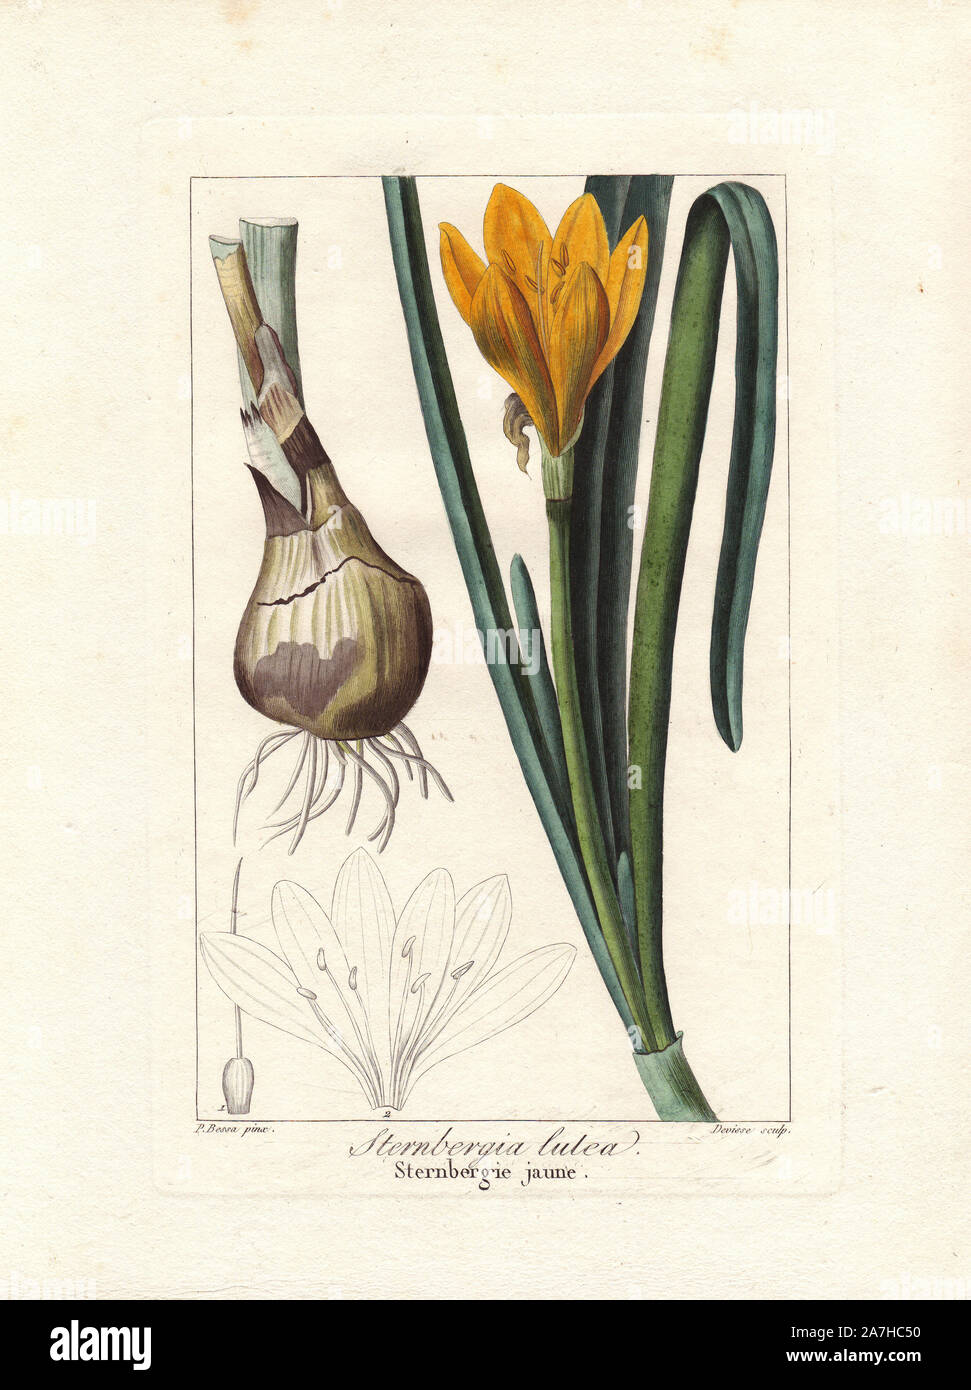 Autumn daffodil, Sternbergia lutea, native to Europe and Asia. Handcoloured stipple engraving on copper by Devisse from a botanical illustration by Pancrace Bessa from Mordant de Launay's 'Herbier General de l'Amateur,' Audot, Paris, 1820. The Herbier was published from 1810 to 1827 and edited by Mordant de Launay and Loiseleur-Deslongchamps. Bessa (1772-1830s), along with Redoute and Turpin, is considered one of the greatest French botanical artists of the 19th century. Stock Photo